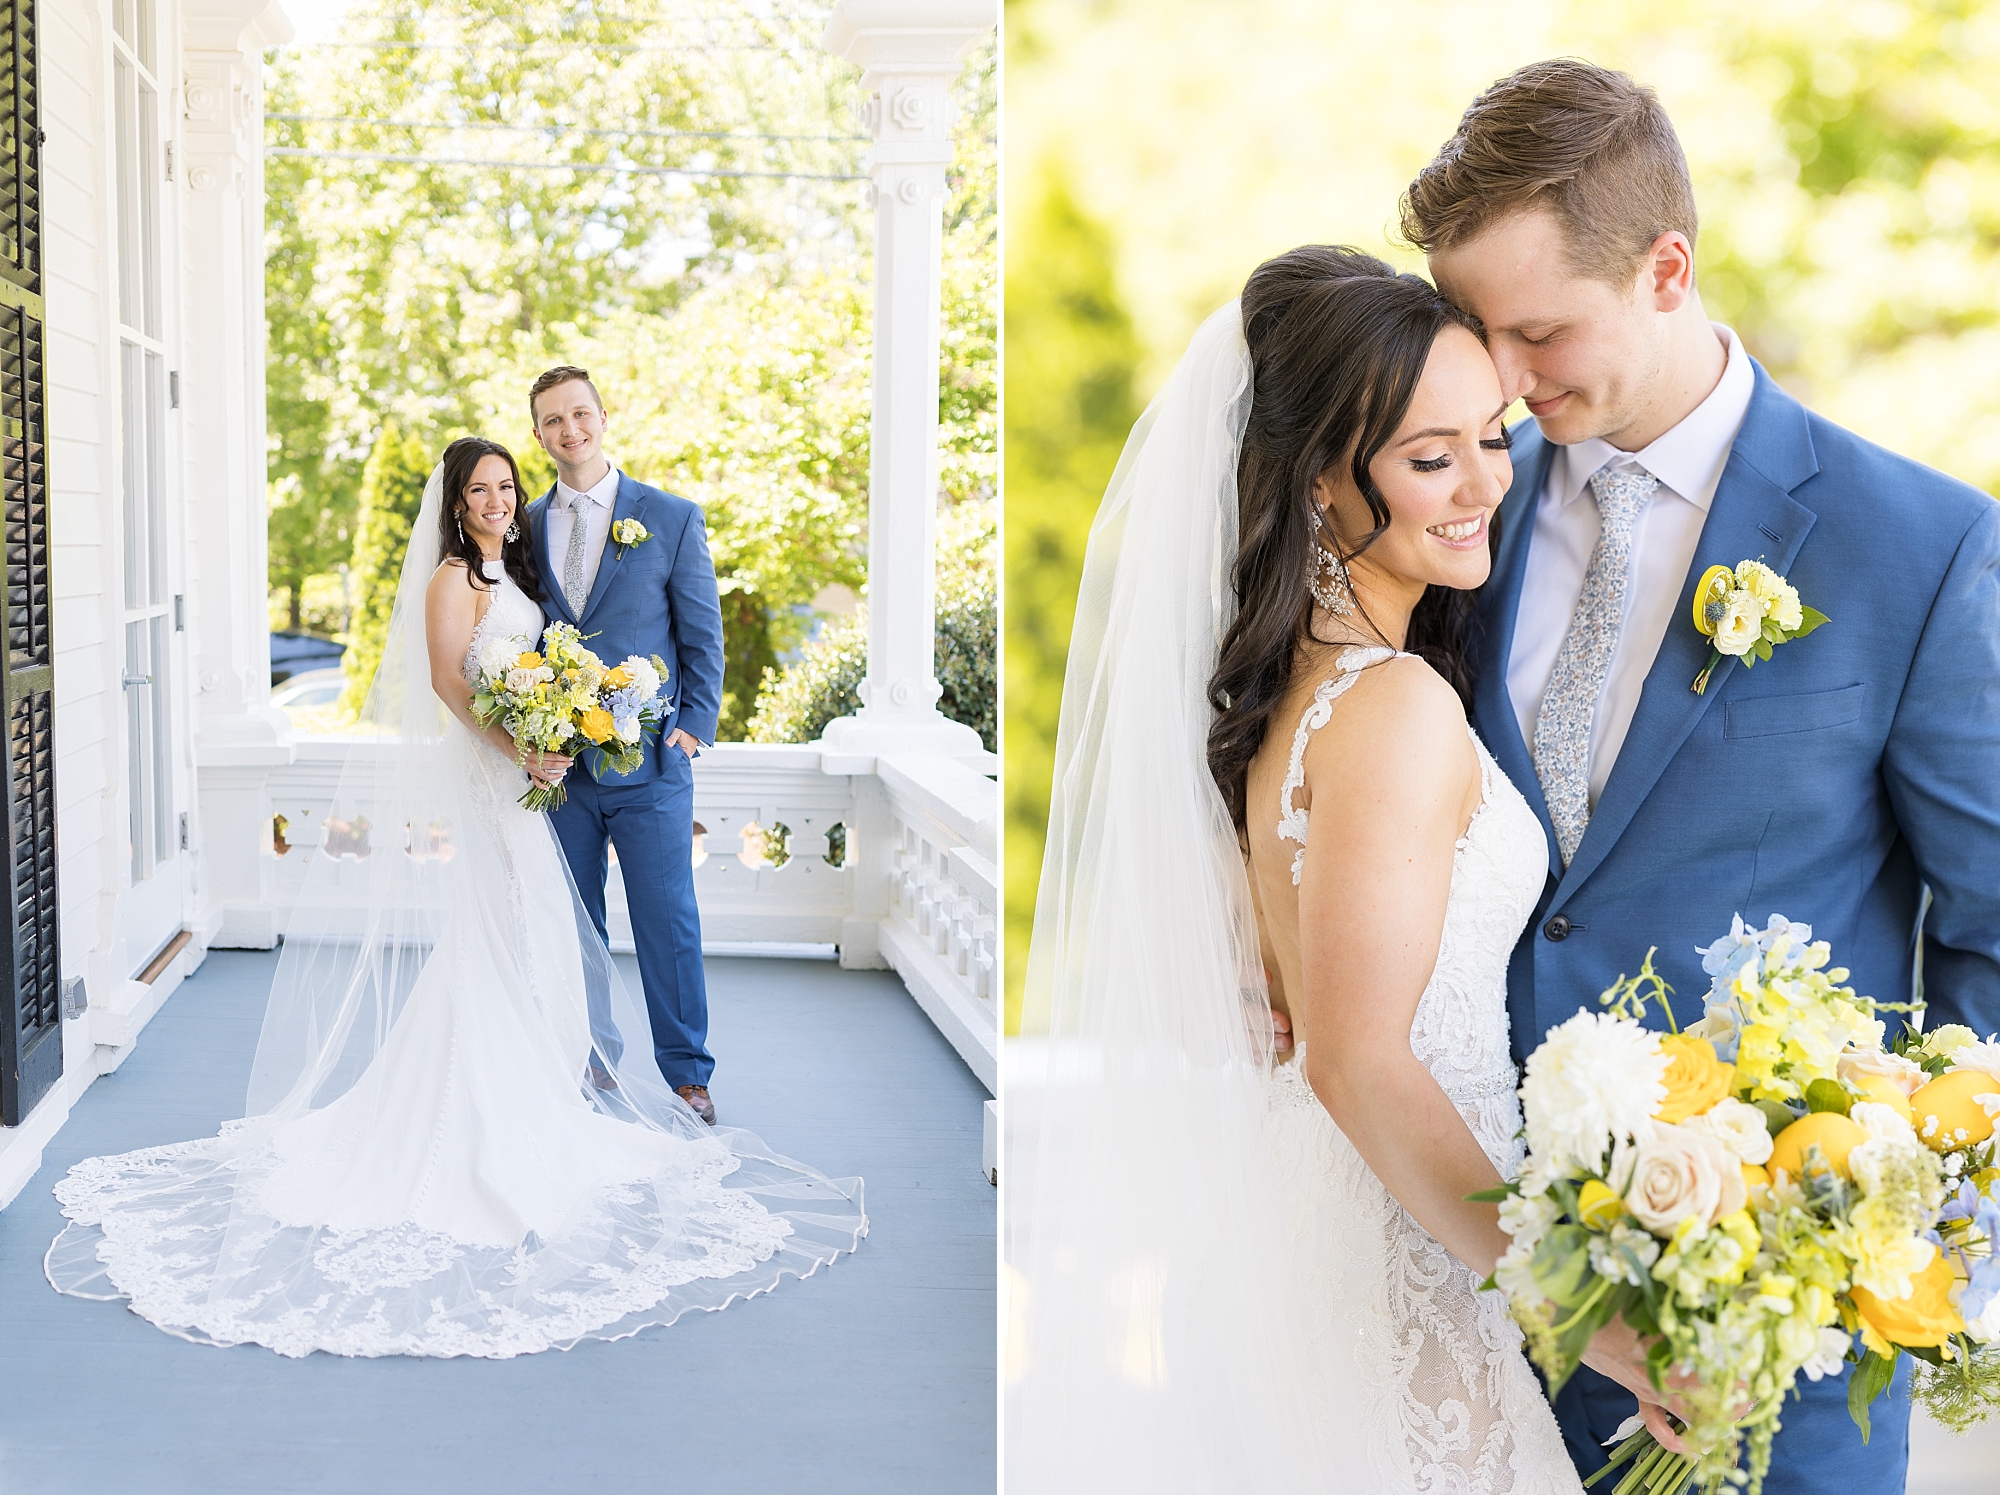 Bride and Groom with floral details | Raleigh NC Wedding Photographer